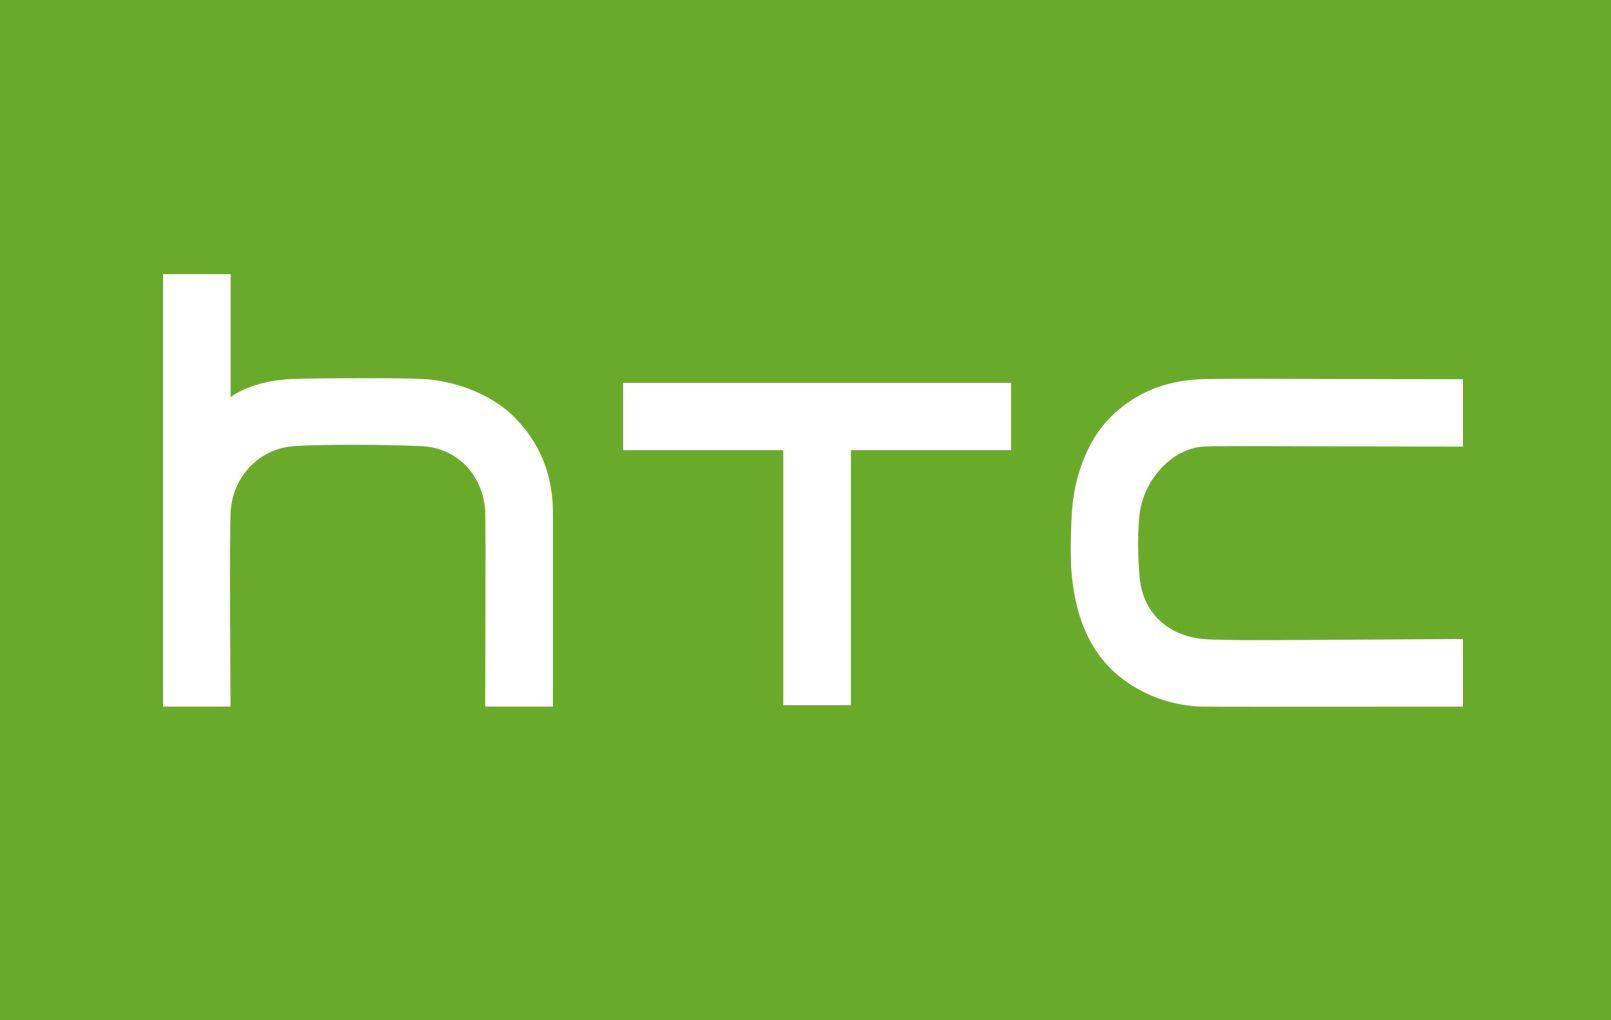 HTC Phone Logo - HTC Logo, HTC Symbol Meaning, History and Evolution